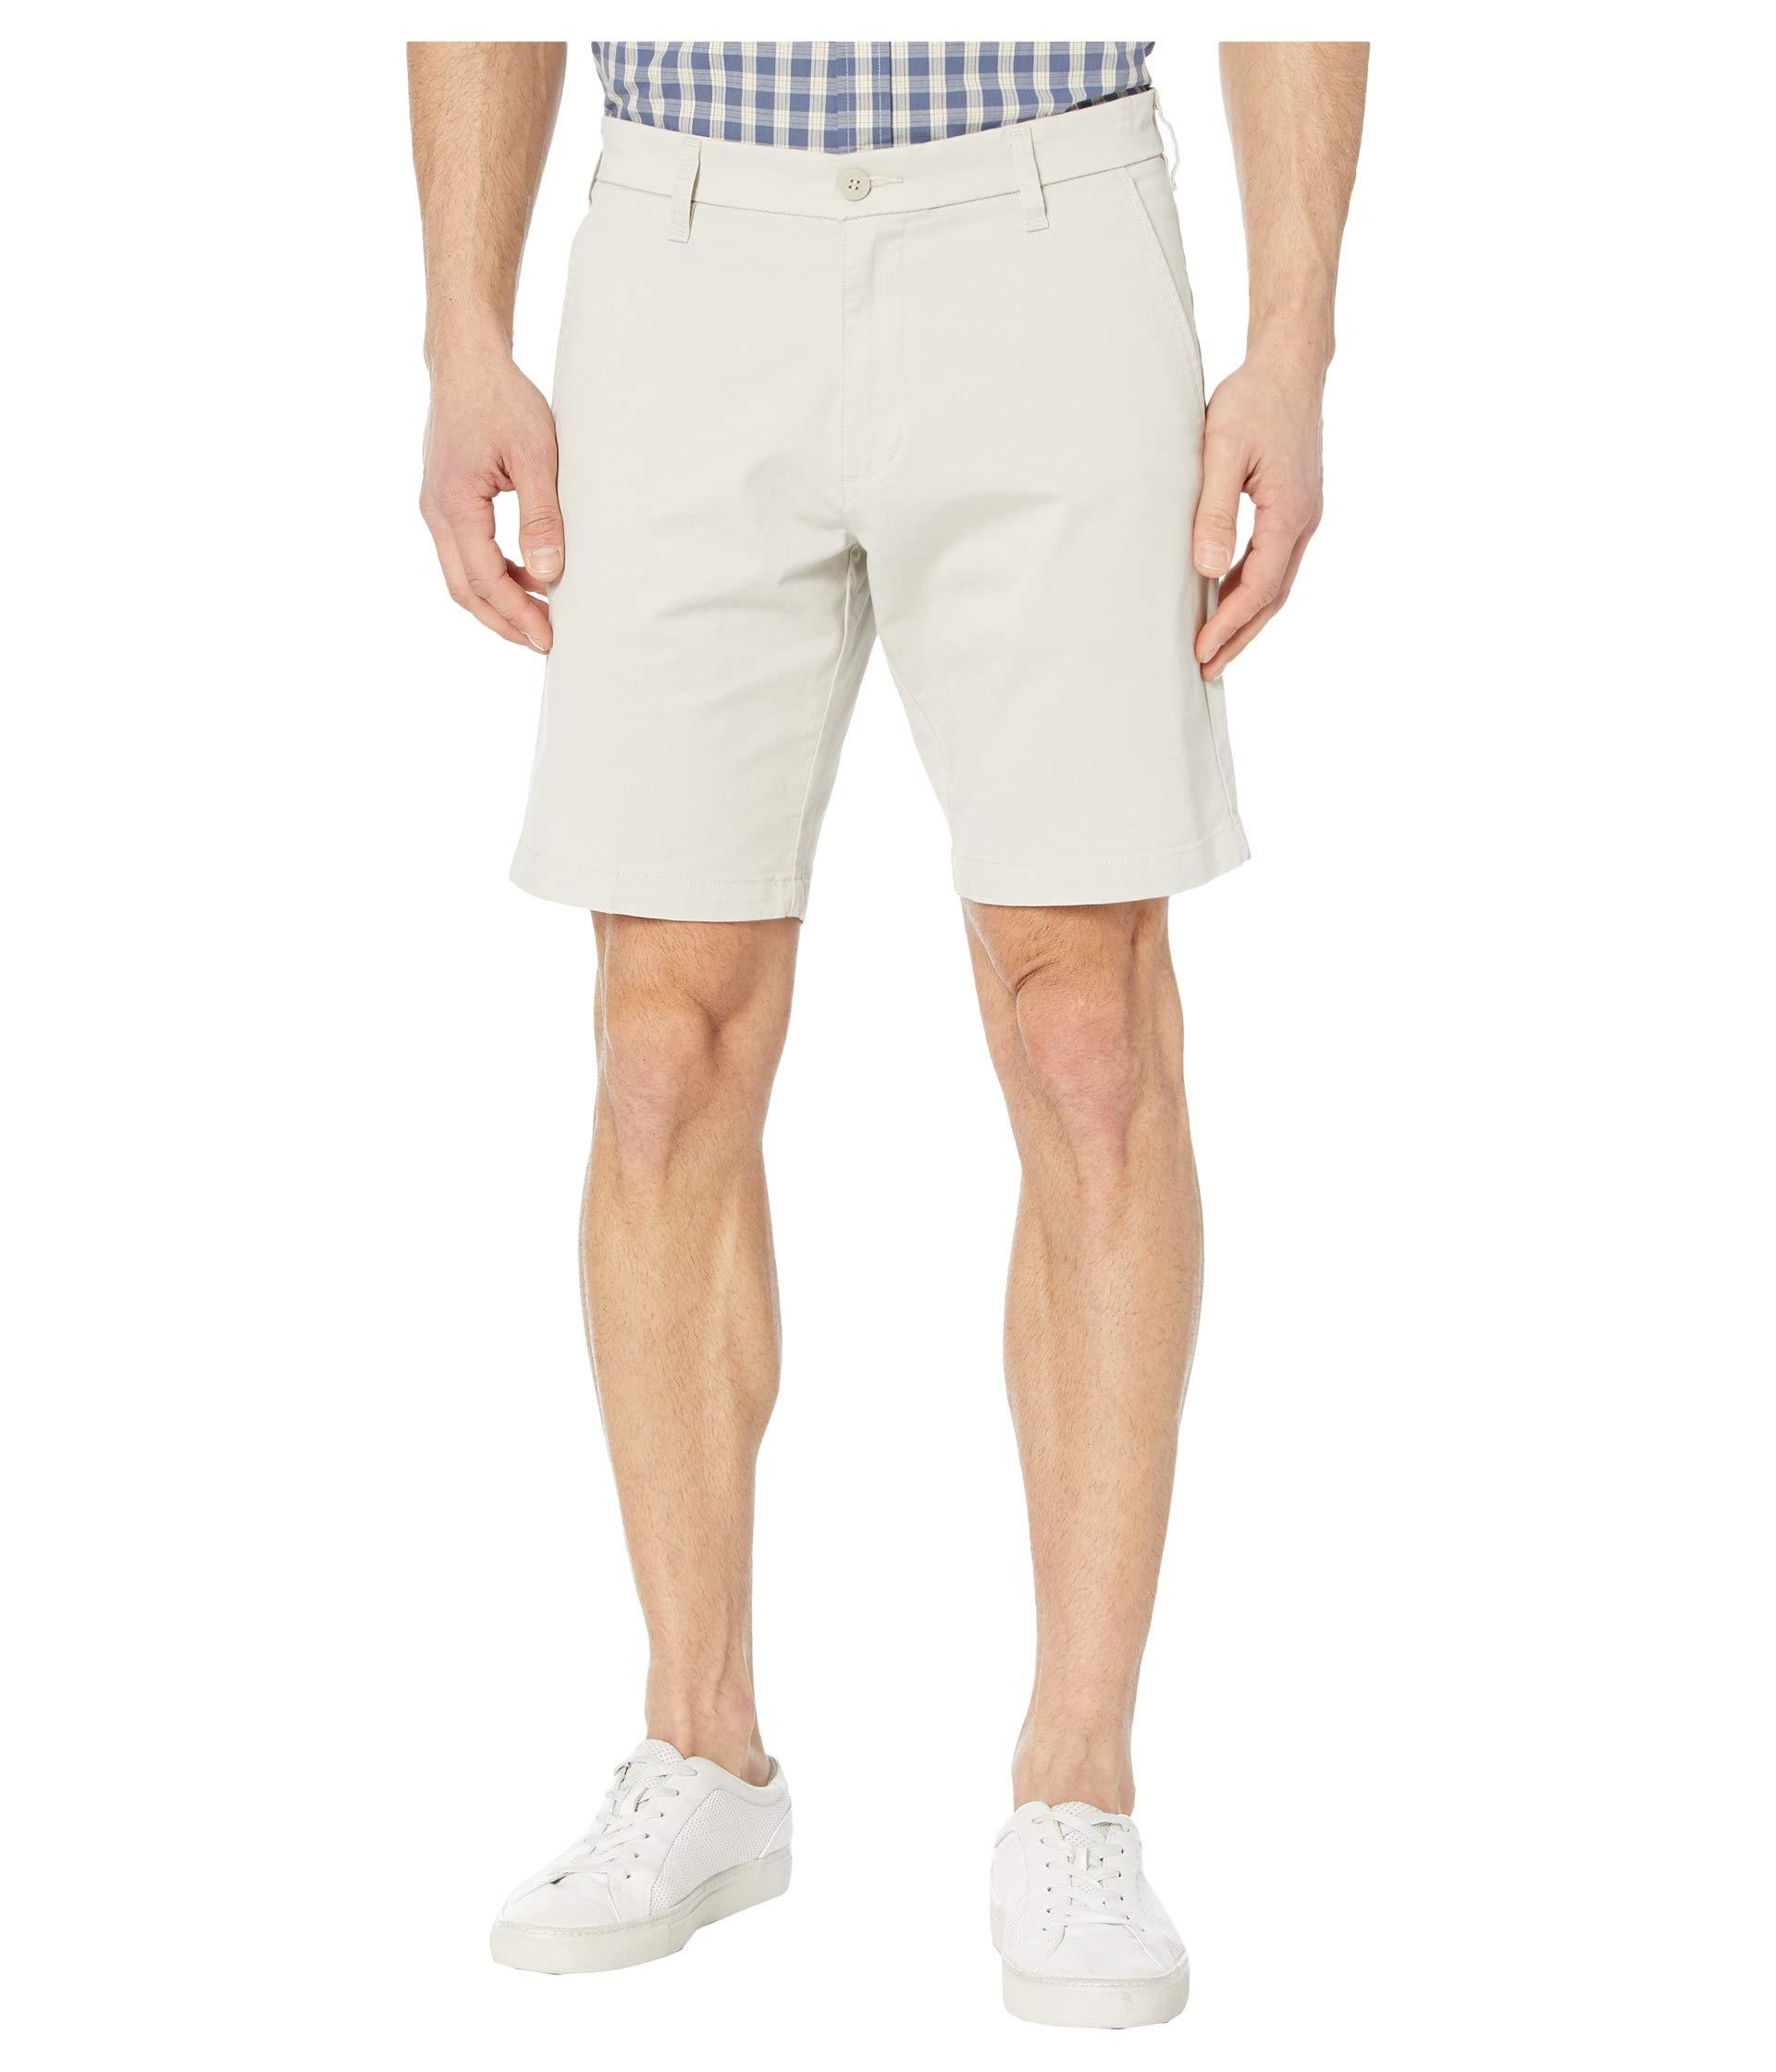 Dockers Cotton Supreme Flex Ultimate Shorts in Gray for Men - Lyst